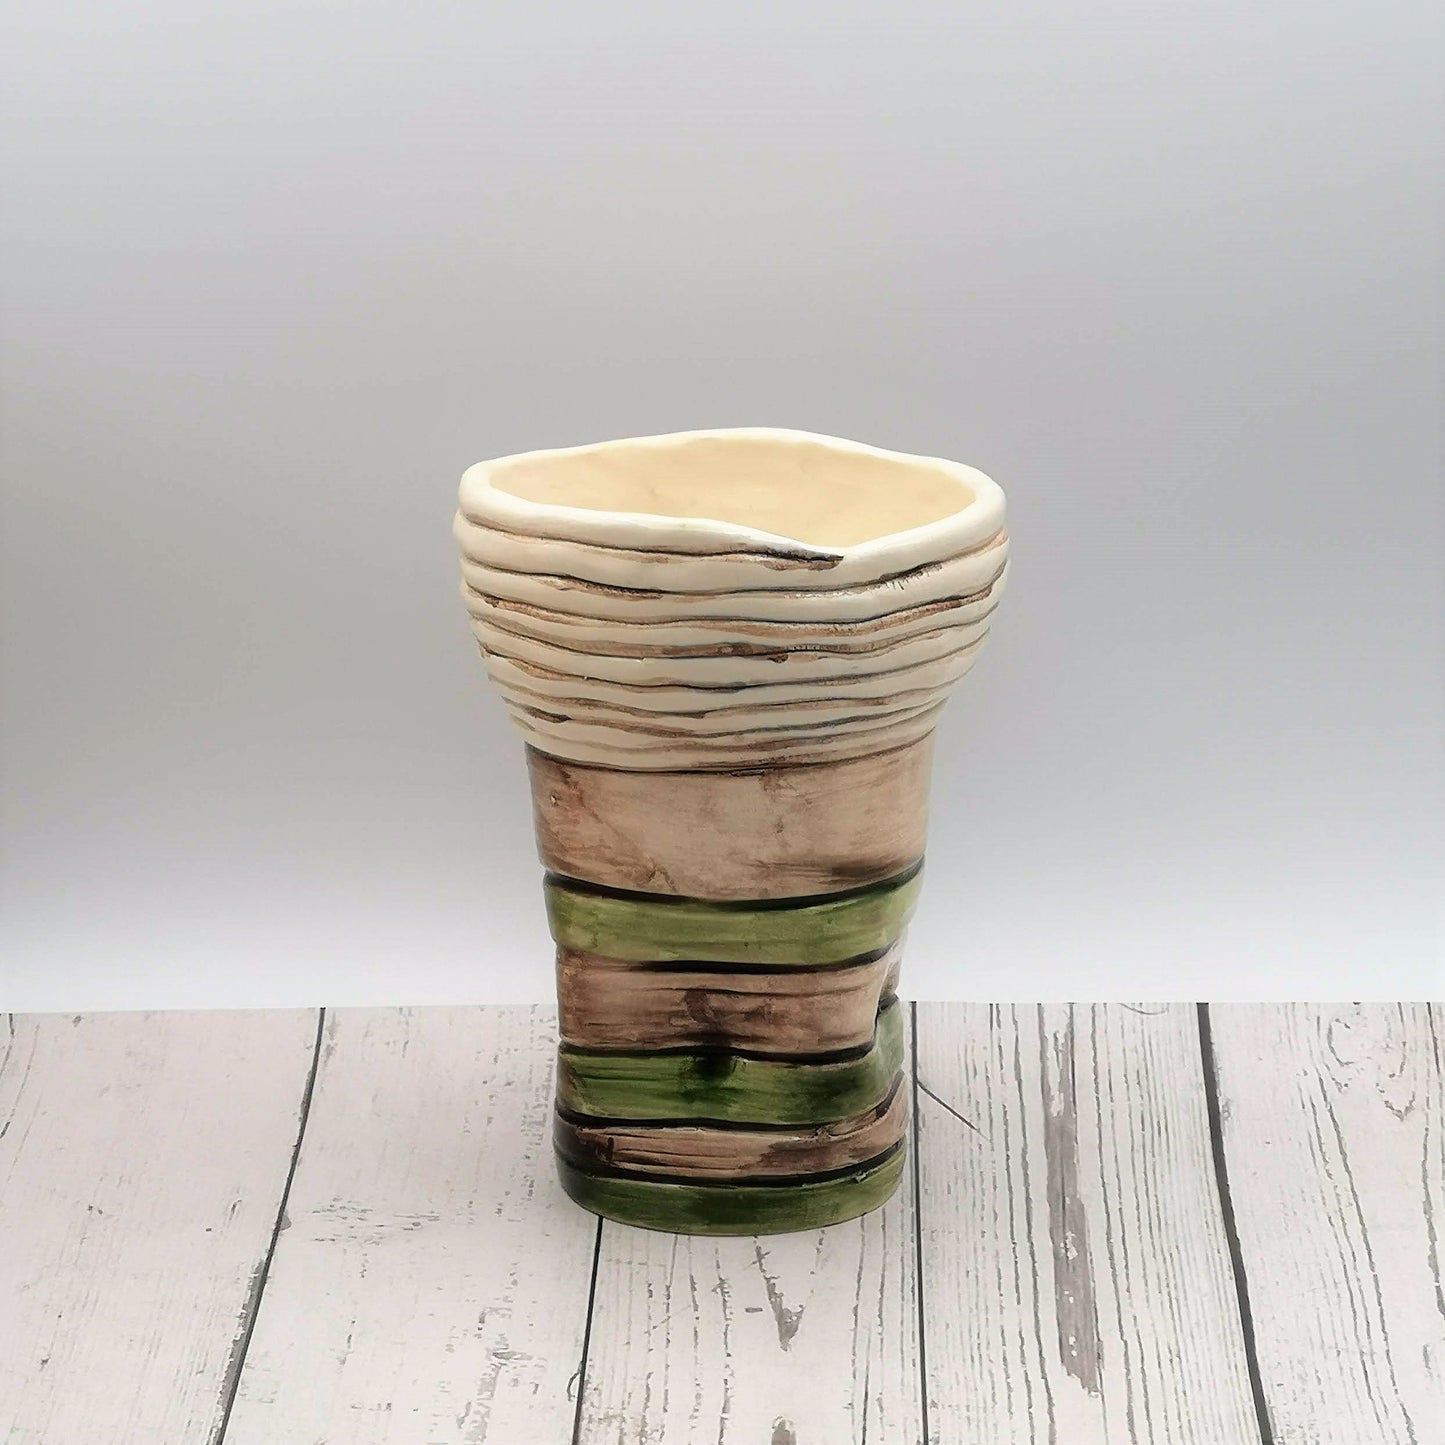 Handmade Ceramic Sculptural Vase For Home Decor, Textured Organic Shape Green And Brown Pottery Vase, Hand Painted Home Gifts For Her - Ceramica Ana Rafael